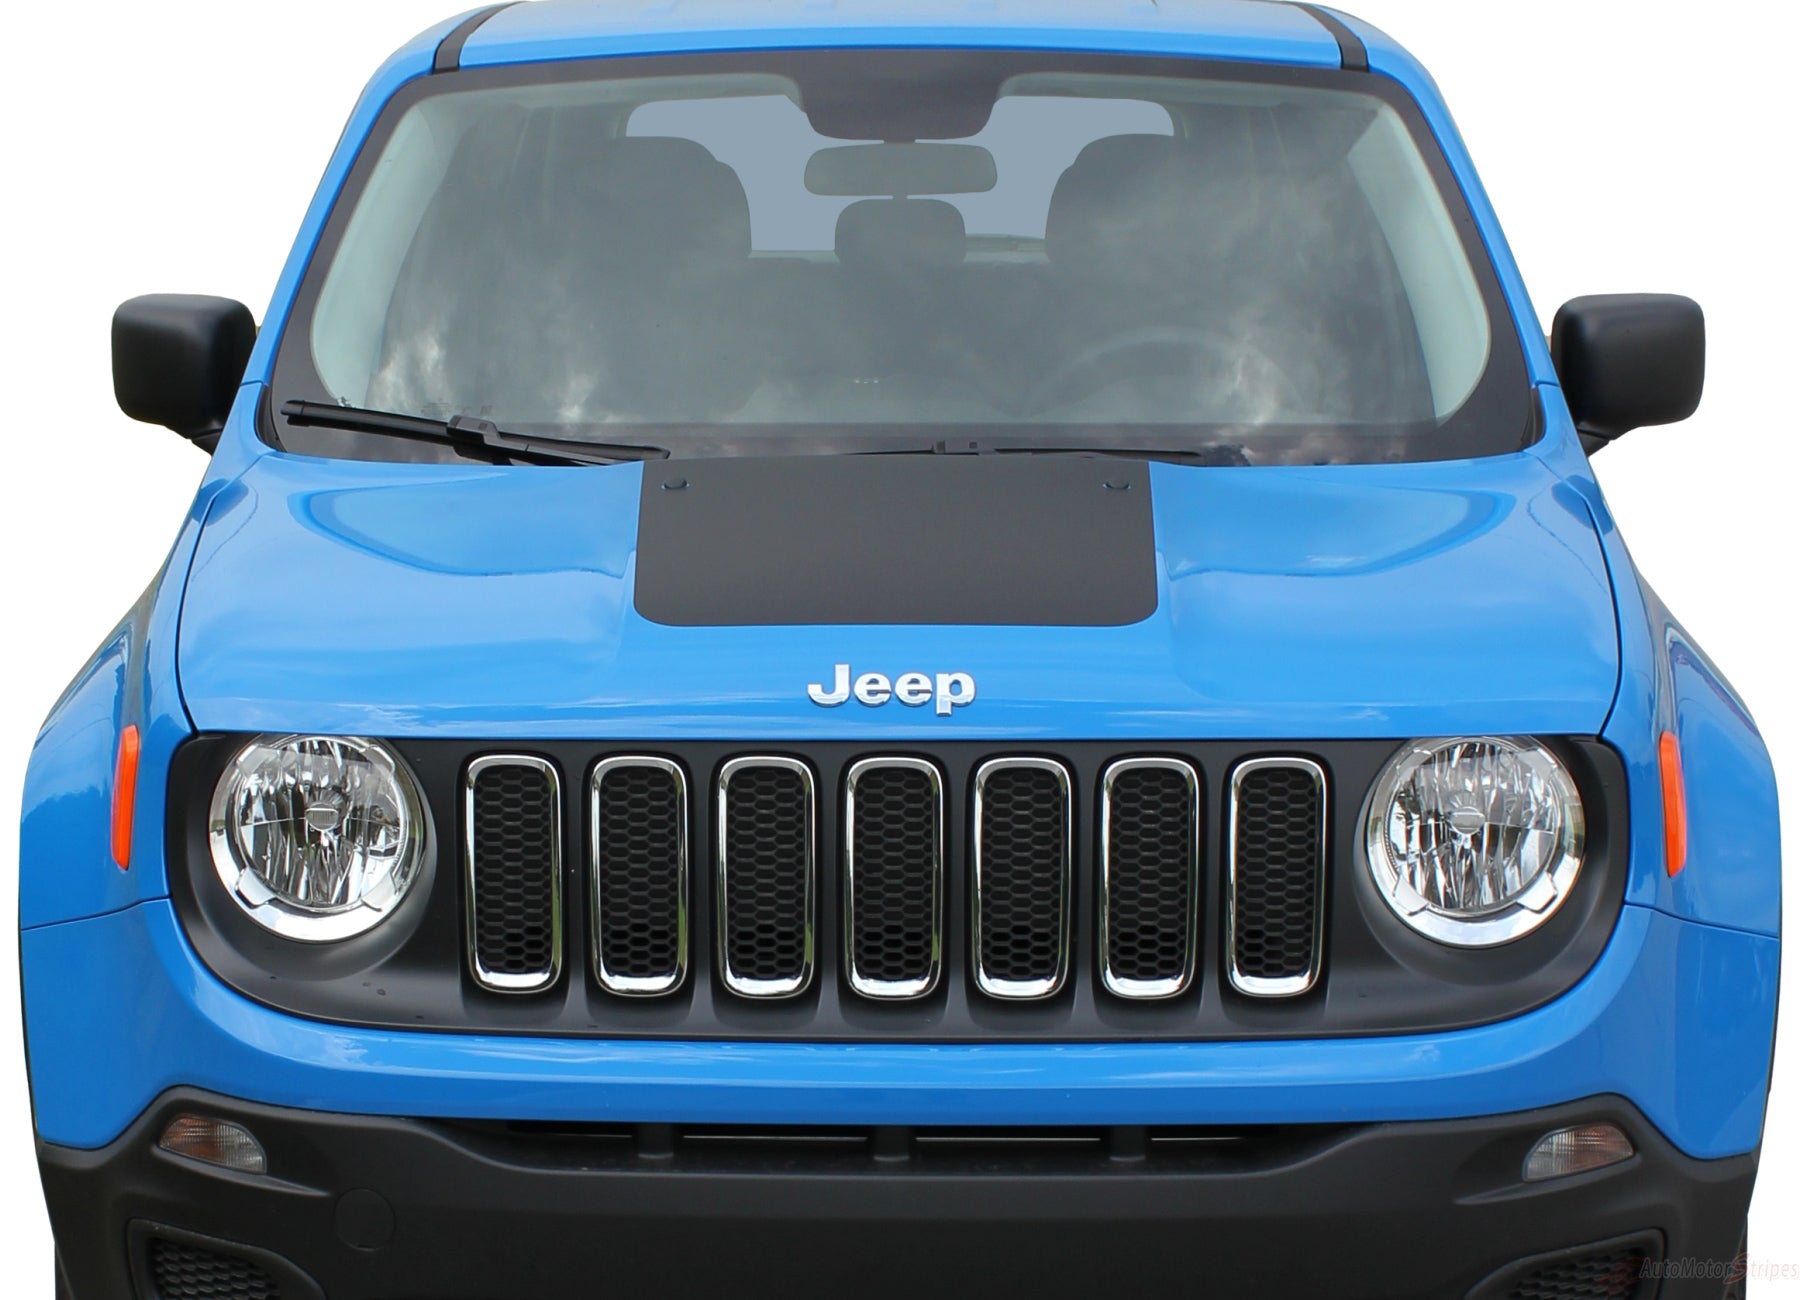 14 21 Jeep Renegade Trailhawk Hood Decal Stripe Vinyl Graphic Auto Motor Stripes Decals Vinyl Graphics And 3m Striping Kits